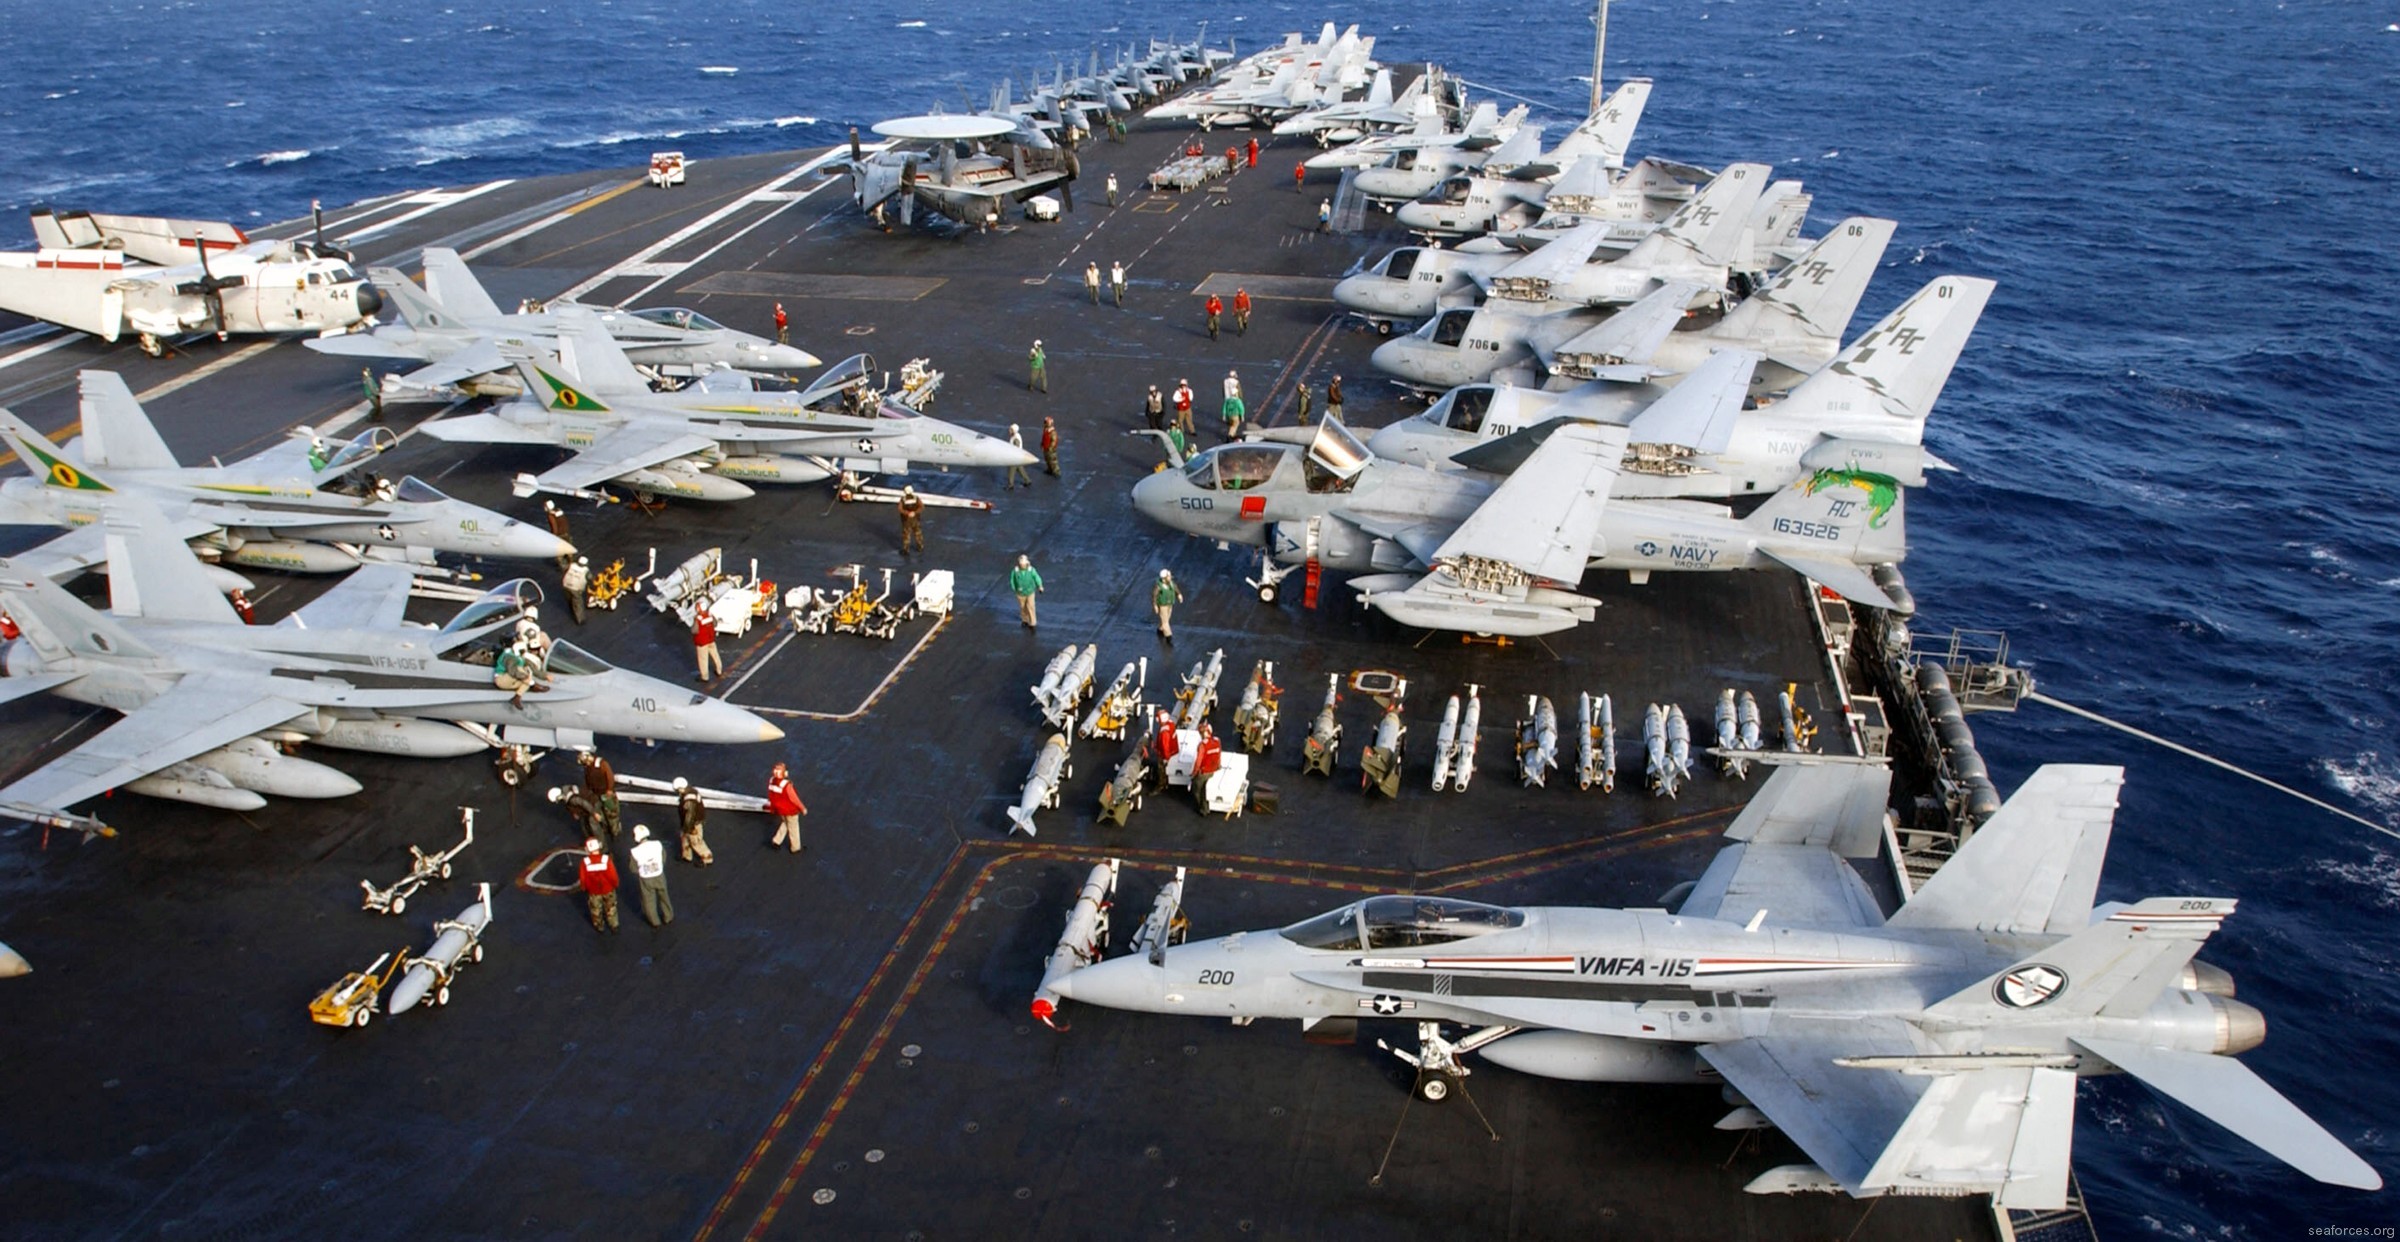 cvw-3 carrier air wing us navy uss harry s. truman cvn-75 embarked squadrons 05